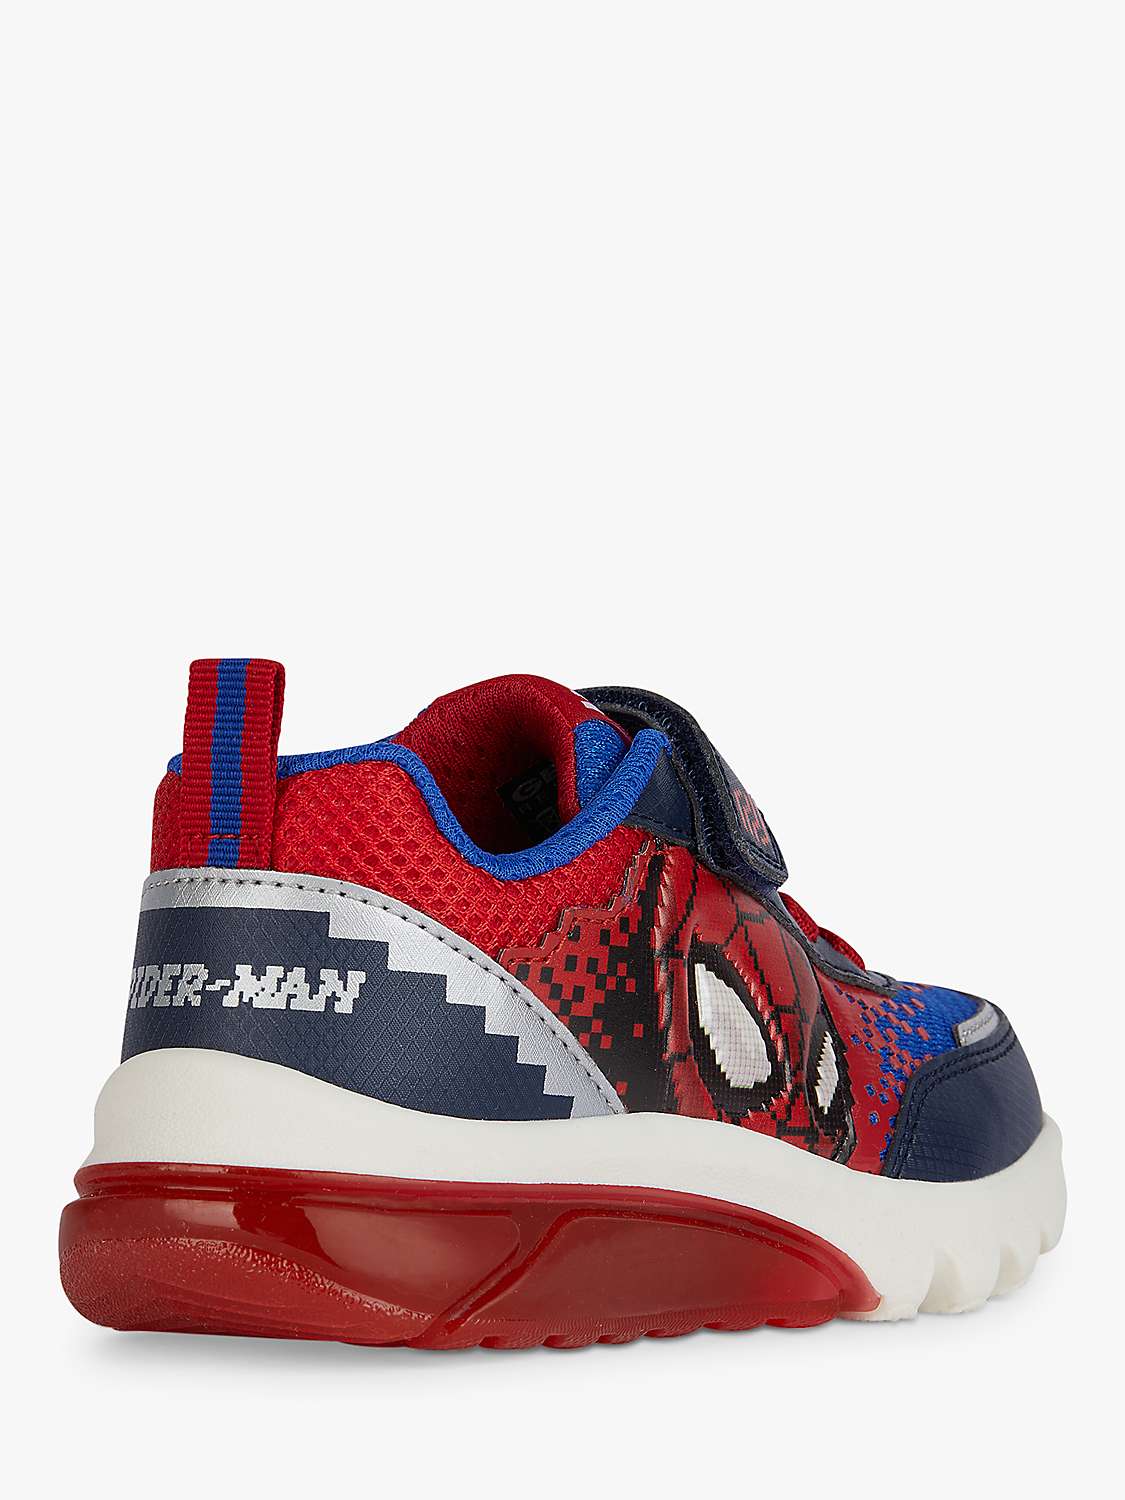 Buy Geox Kids' Ciberdron Spiderman Light Up Trainers, Navy/Red/White Online at johnlewis.com